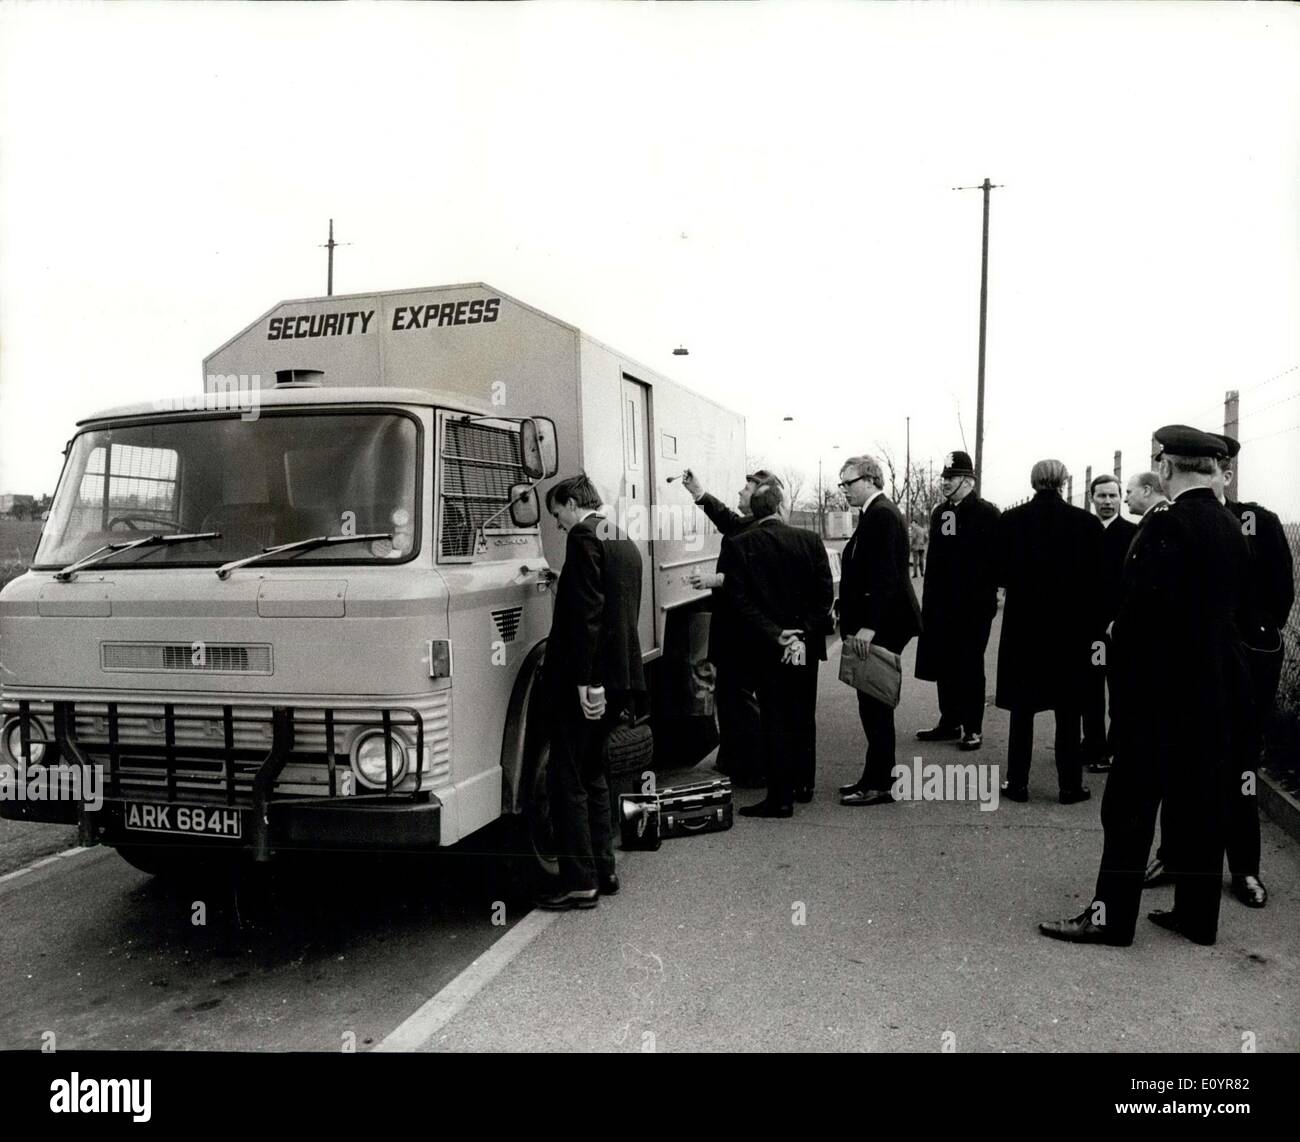 Mar. 27, 1971 - Shotgun Bandits grab ?458,000 in ambush when one of the security guards goes to public lavatory: four security guards who stopped their 8-ton armoured van in a lay-by in Purely Way, near Croydon, so that one of them could go into a public lavatory, were ambushed yesterday and robbed of ?458,000. Ten raiders, wearing stocking masks and carrying shotguns and cashes, forced the guards to open up the Security van, snatched 28 bags of banknotes and escaped in four vehicles, all of which were stolen.The robbery netted the largest cash haul since the Great Train Robbery in 1963 Stock Photo